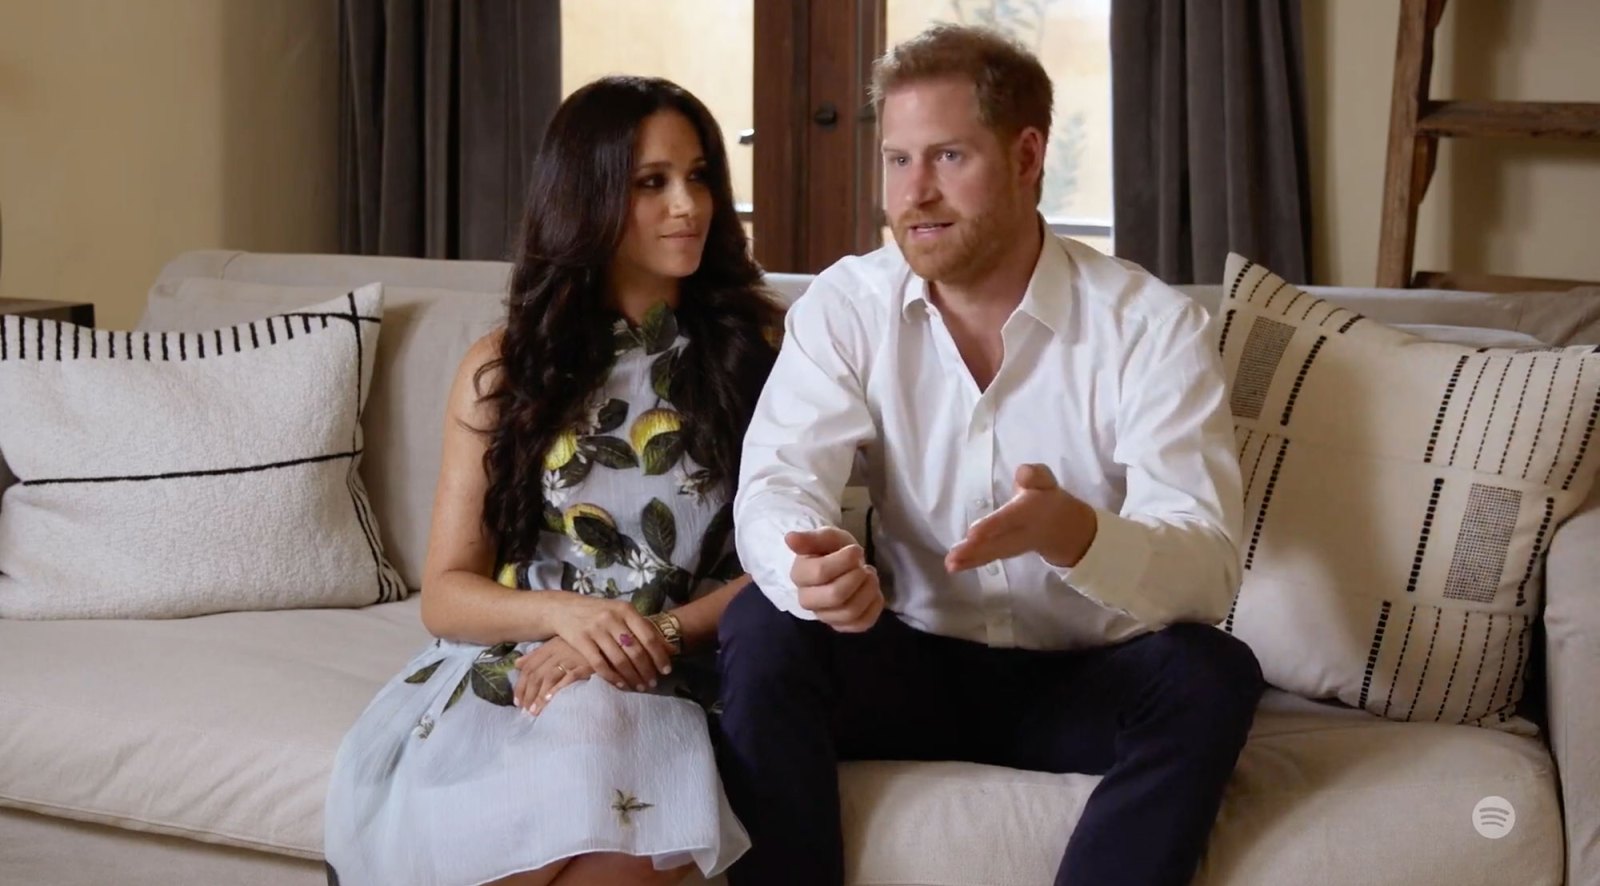 Meghan Markle and Prince Harry Make 1st Public Appearance Since Pregnancy Announcement